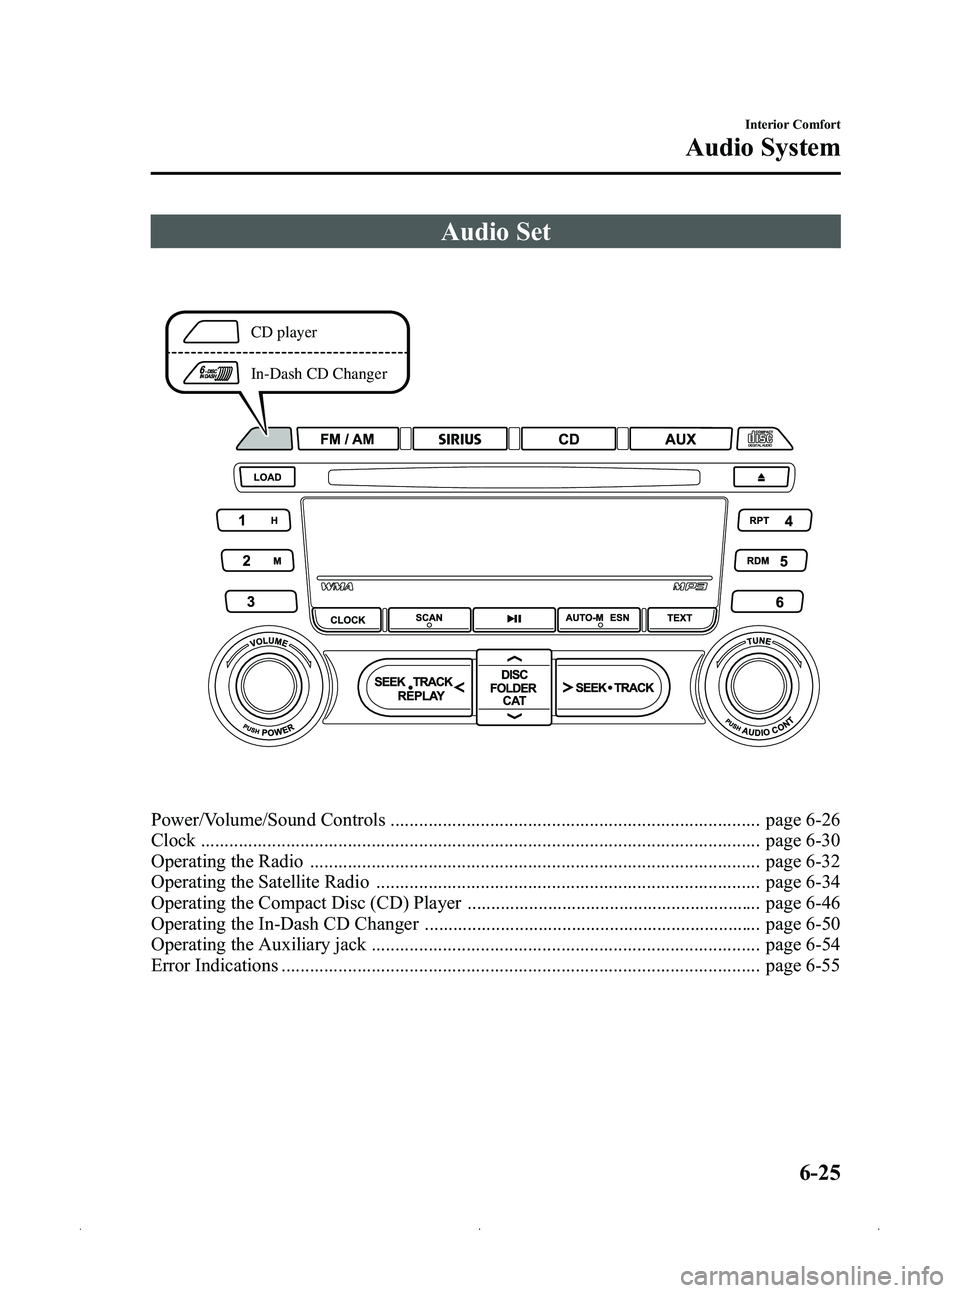 MAZDA MODEL MX-5 MIATA 2012  Owners Manual Black plate (247,1)
Audio Set
CD player
In-Dash CD Changer
Power/Volume/Sound Controls .............................................................................. page 6-26
Clock ..................